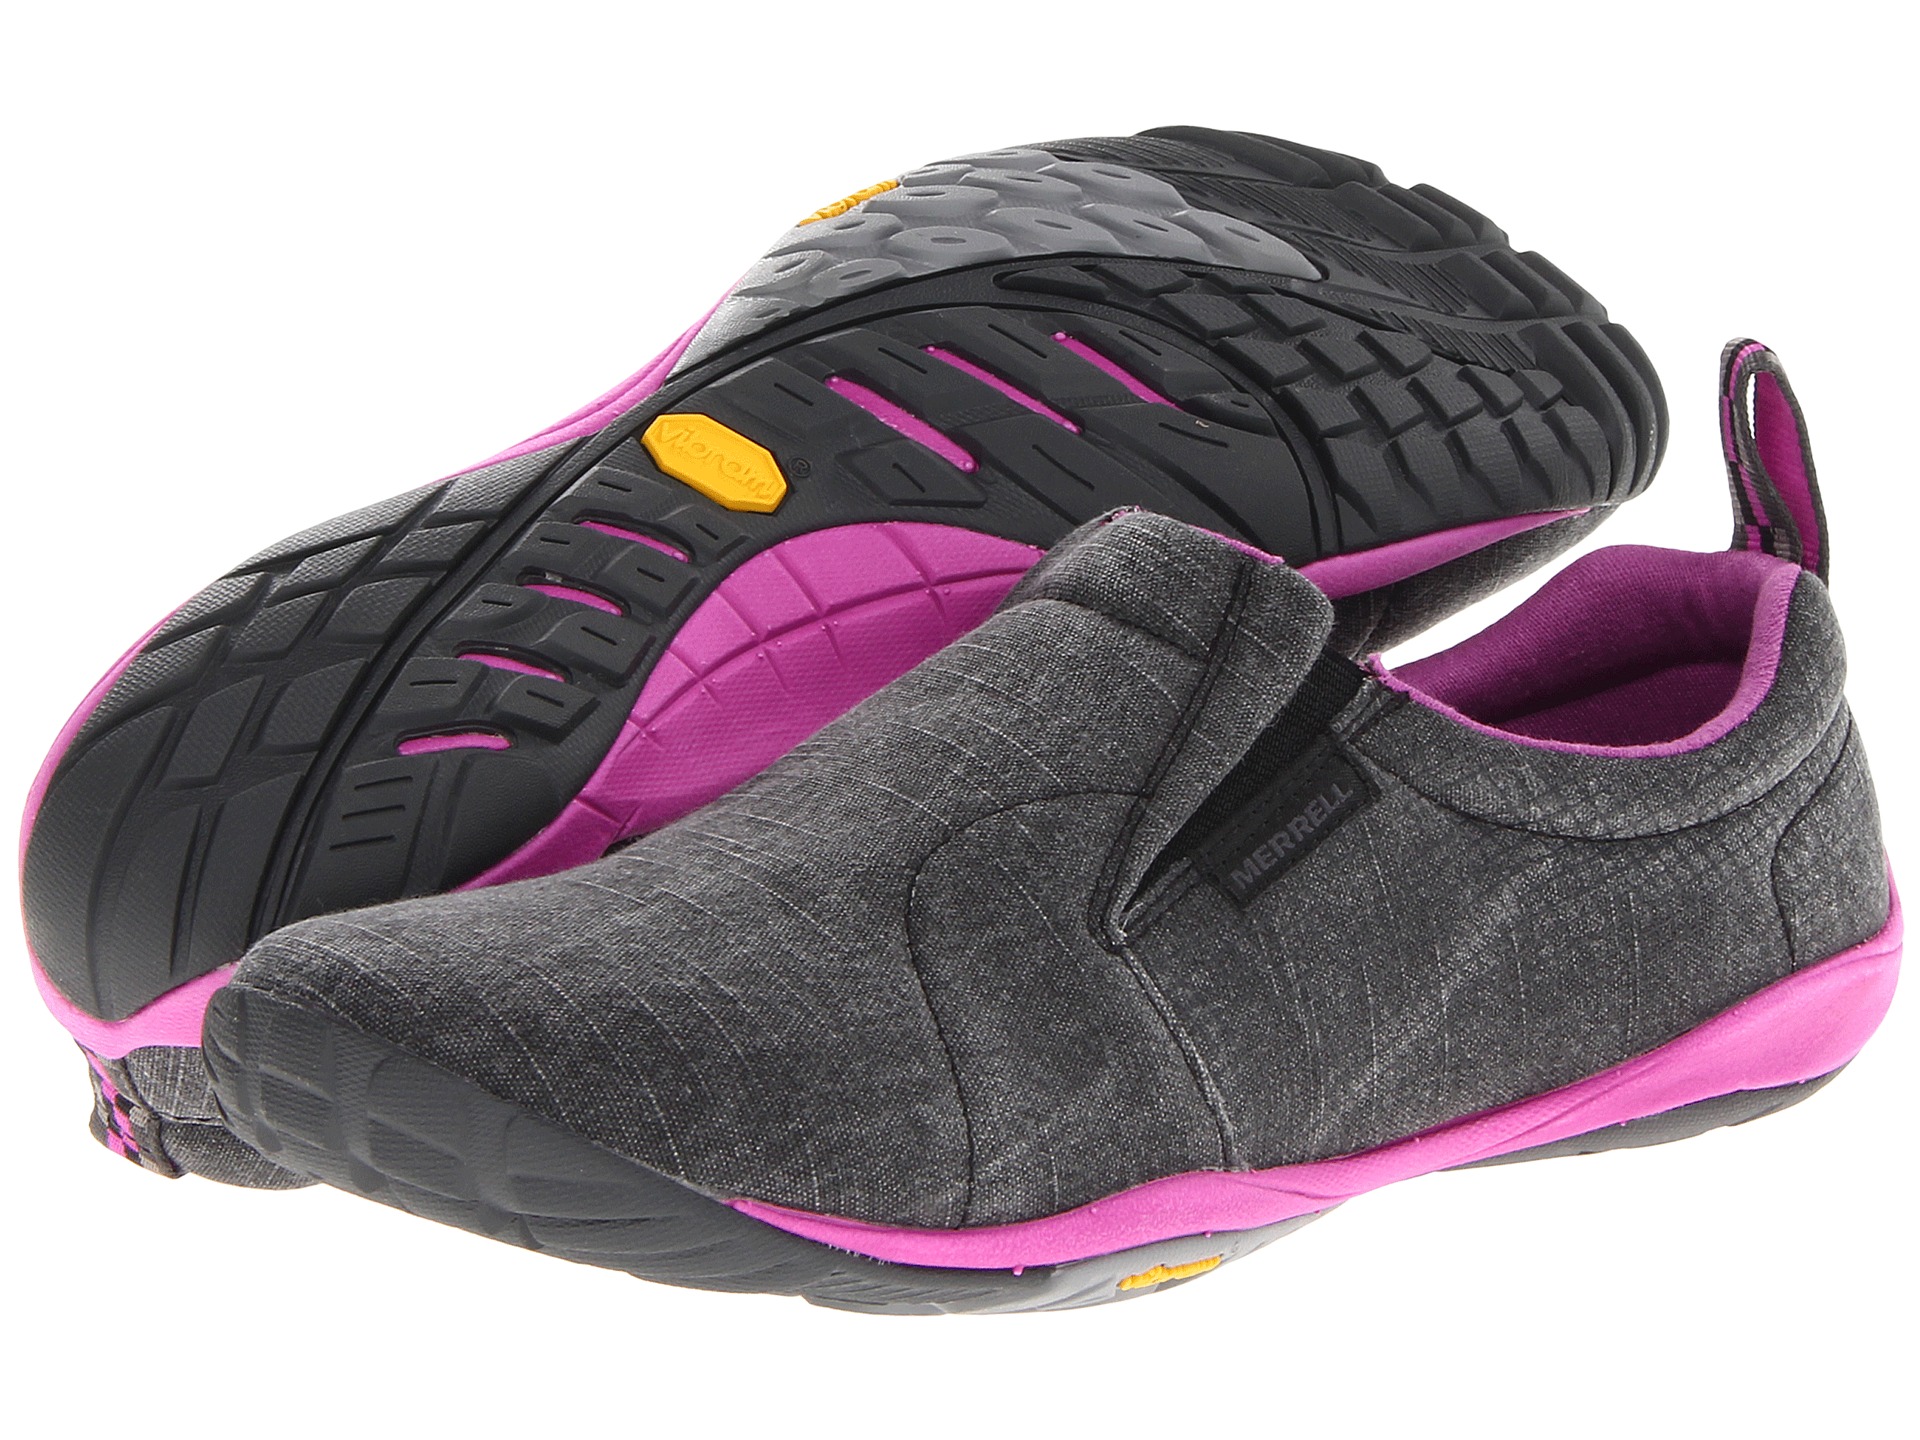 Merrell Jungle Glove Canvas, Shoes, Women | Shipped Free at Zappos